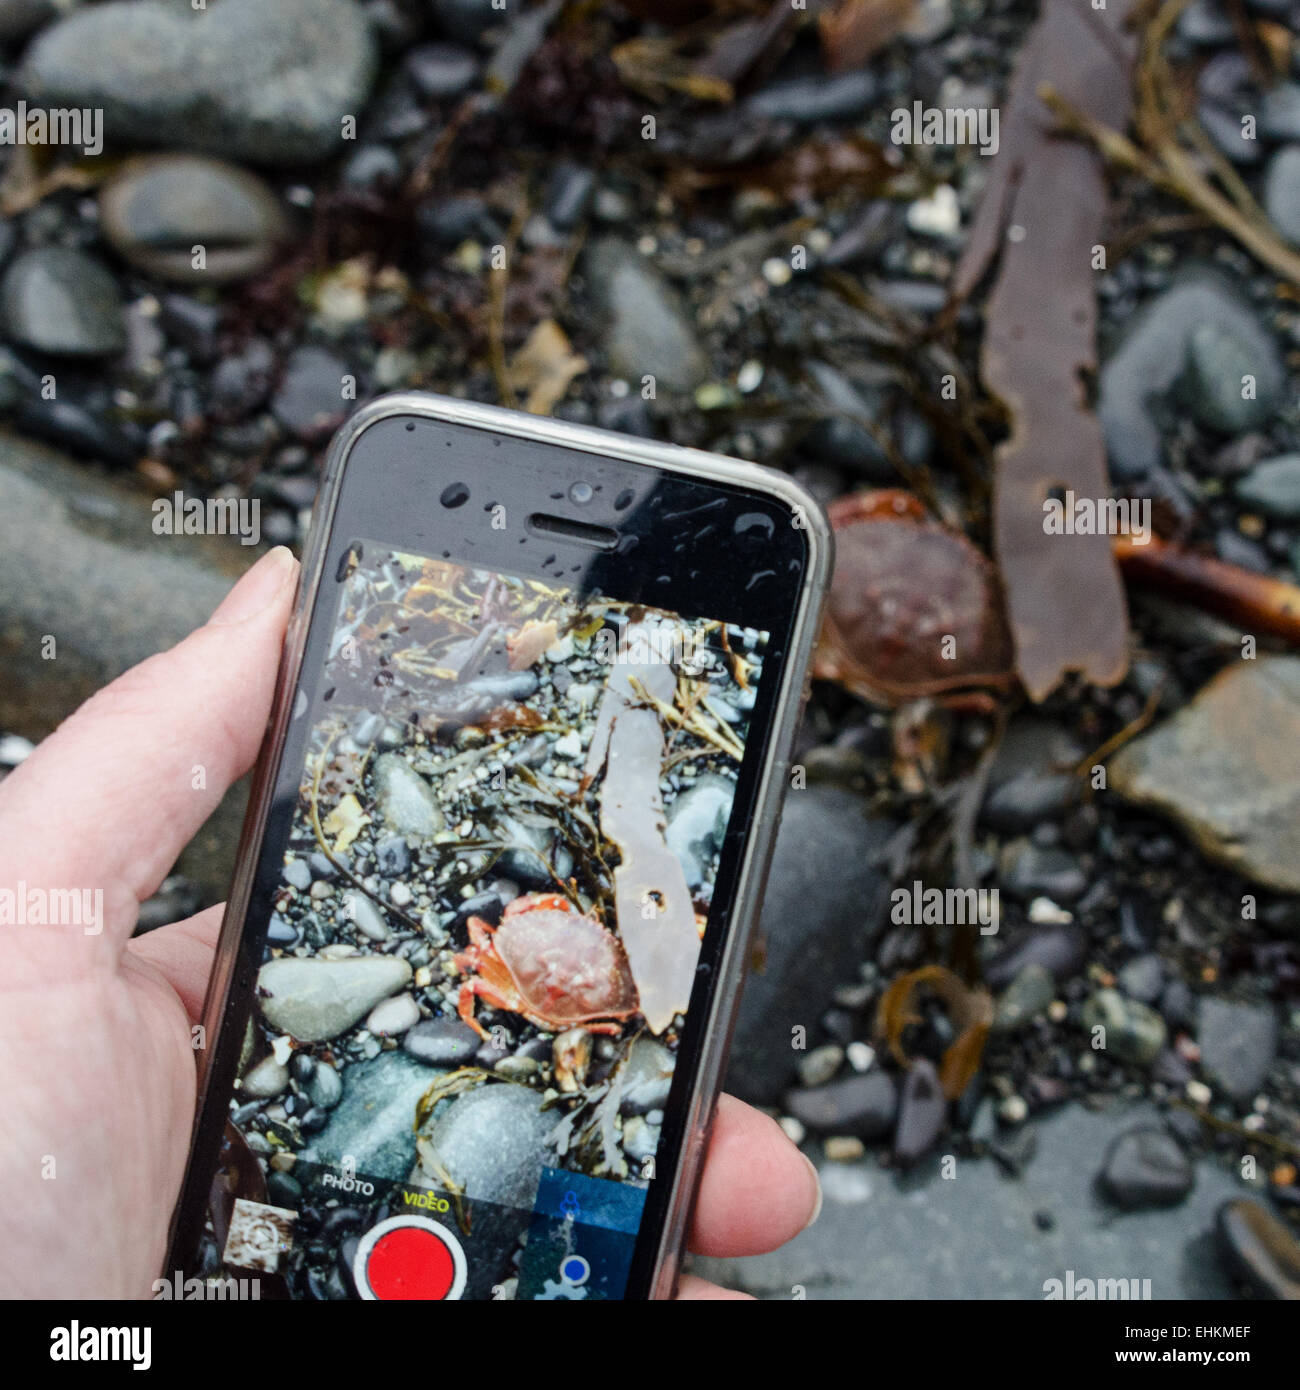 Woman's hand holding an iPhone and photographing a Rock Crab on the beach, Acadia National Park,  Bar Harbor, Maine. Stock Photo